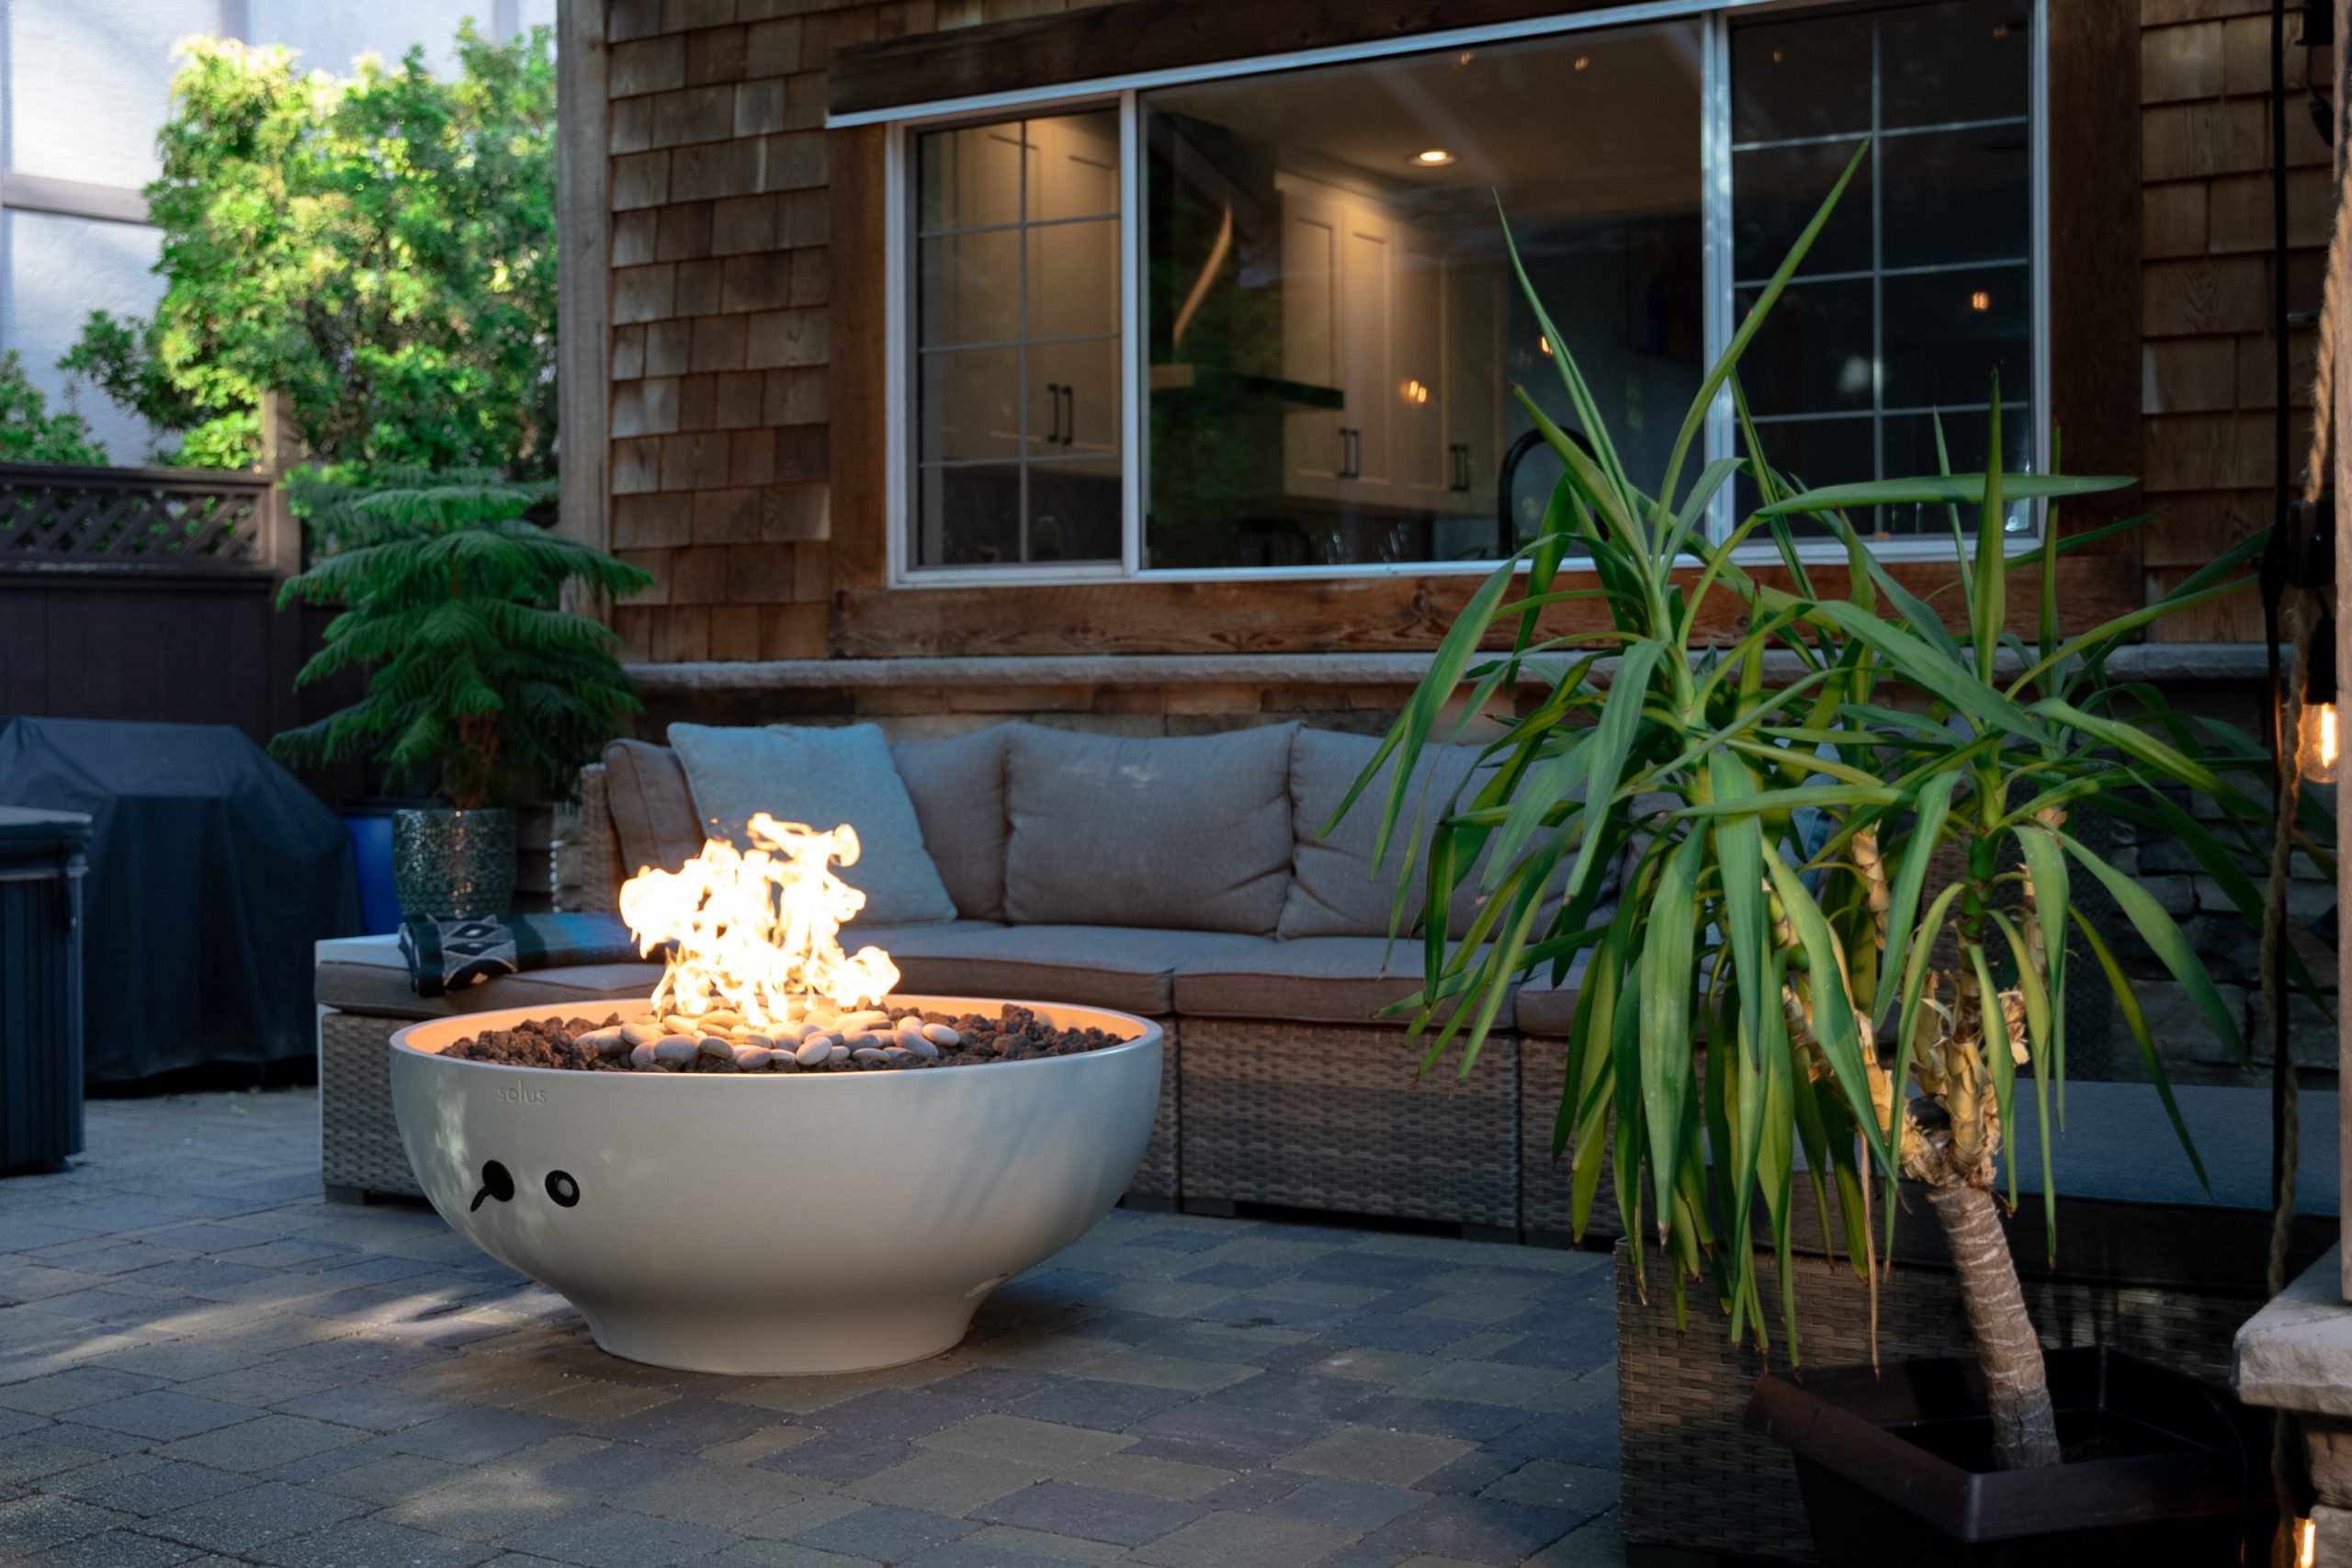 Are fire pits legal in Seattle, Washington?